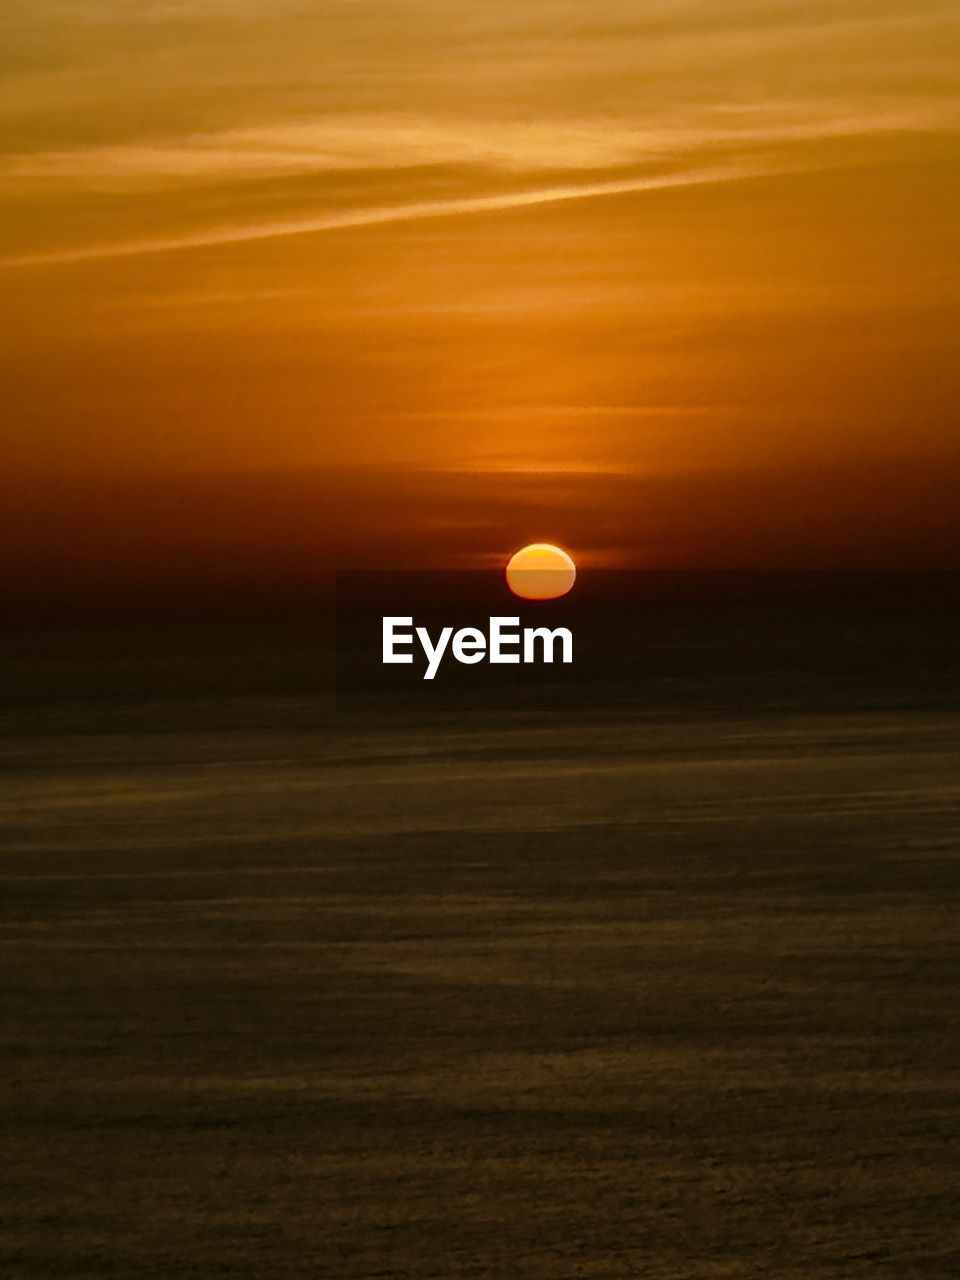 sky, sunset, beauty in nature, horizon, scenics - nature, tranquility, tranquil scene, nature, orange color, sea, no people, sunlight, sun, dawn, idyllic, afterglow, cloud, dramatic sky, water, environment, outdoors, land, non-urban scene, landscape, evening, ocean, horizon over water, circle, moon